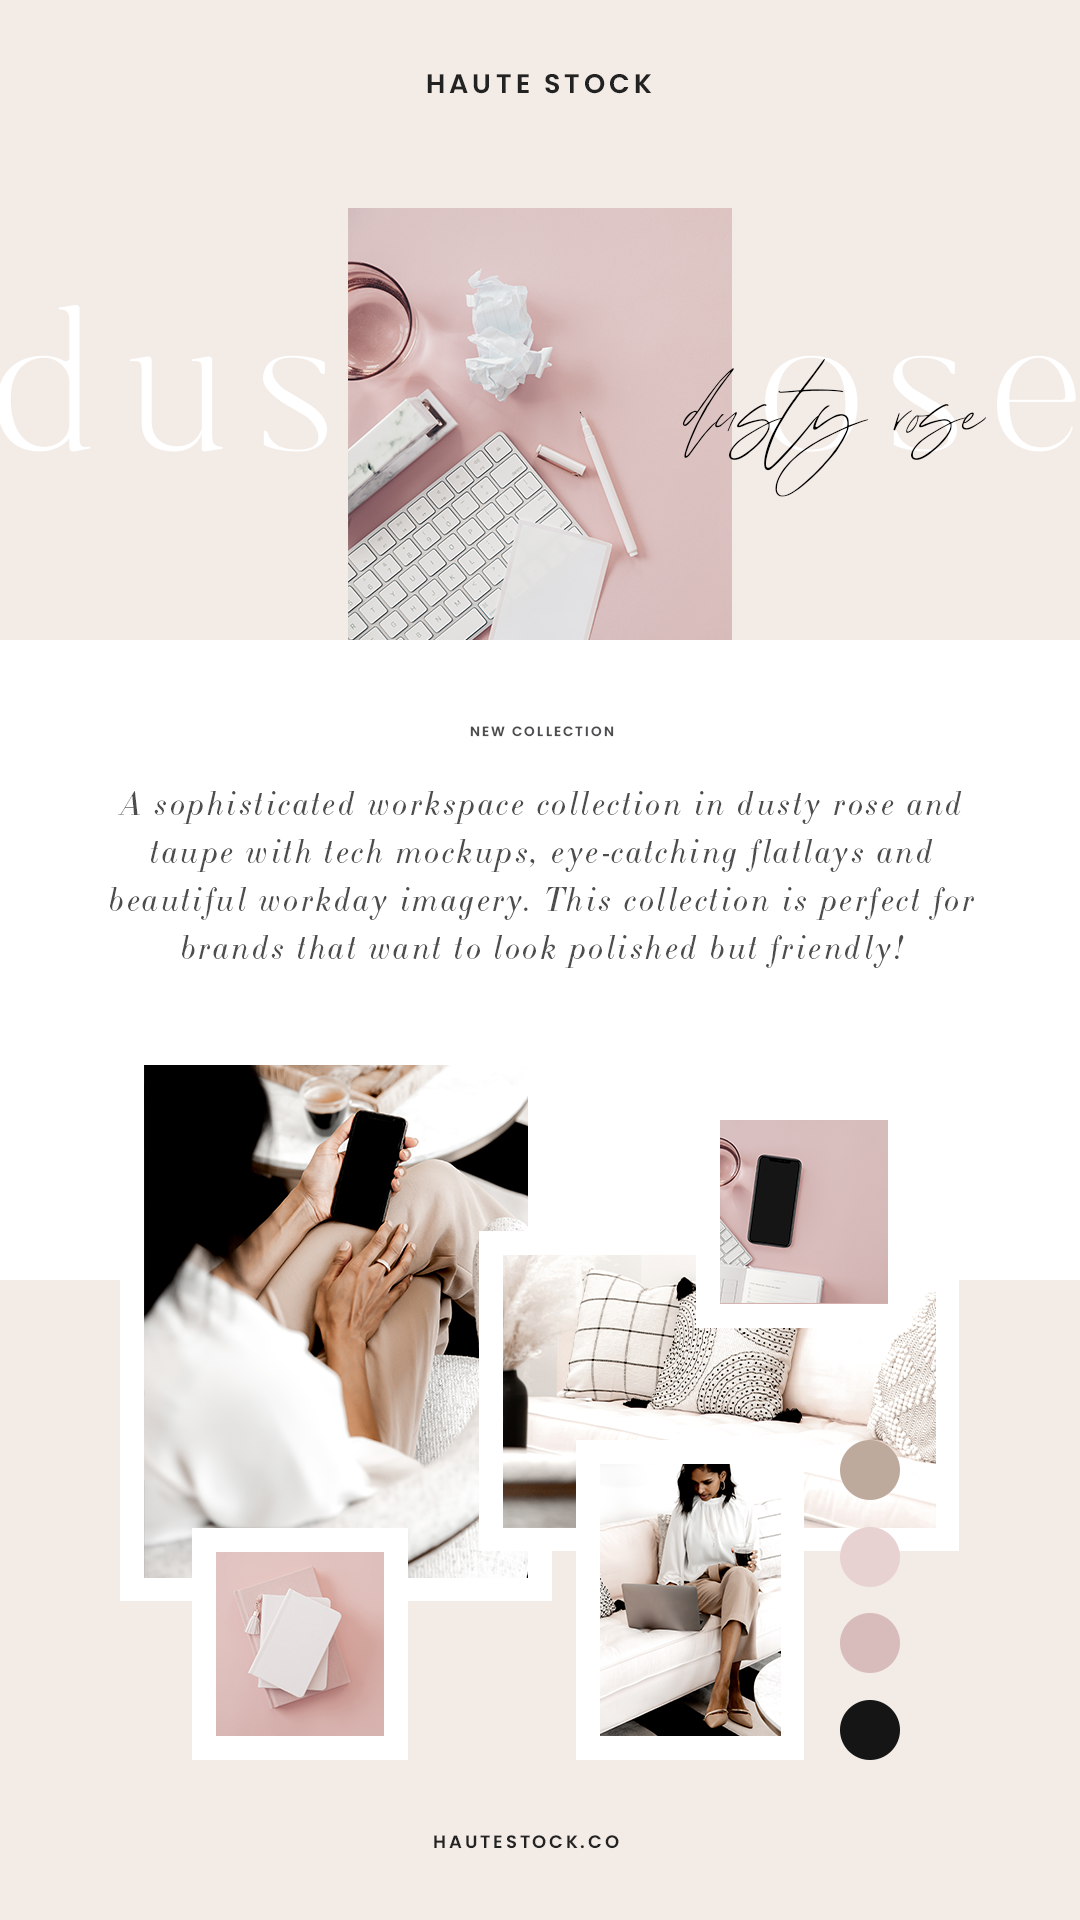 Dusty rose and taupe feminine styled stock photos. Workspace stock imagery. Pink office stock photos. Woman with dark skin working in beautiful feminine styled office space. Pink background workspace stock imagery from Haute Stock.